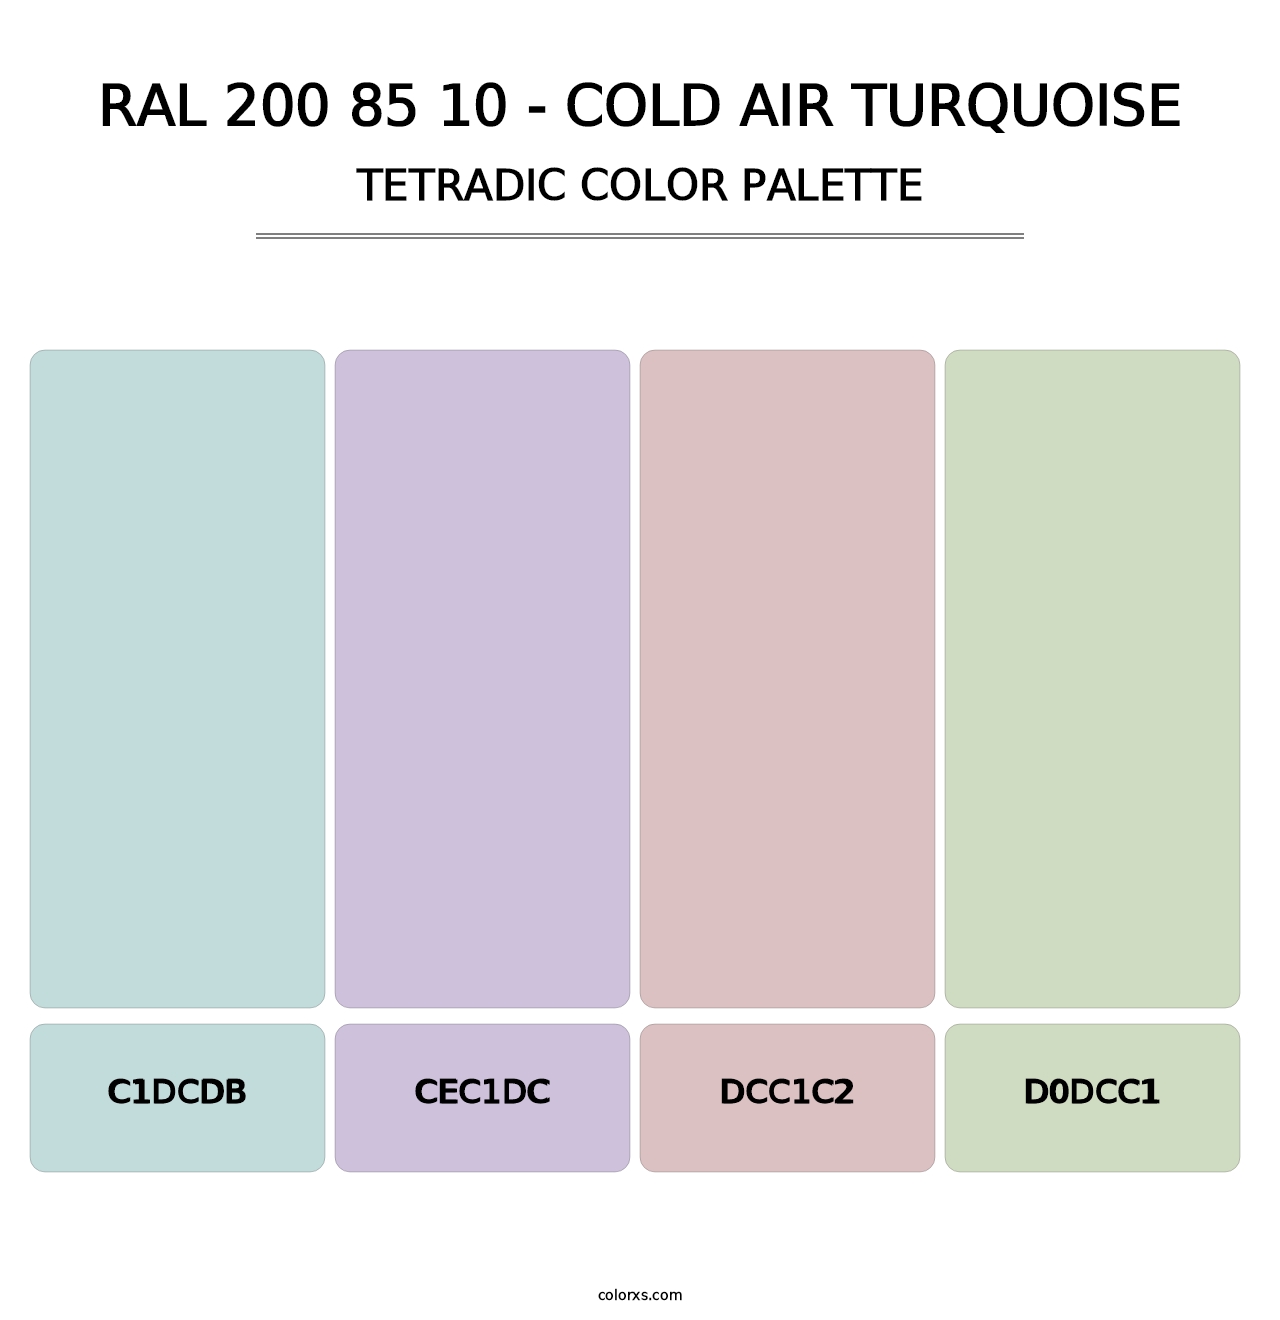 RAL 200 85 10 - Cold Air Turquoise - Tetradic Color Palette